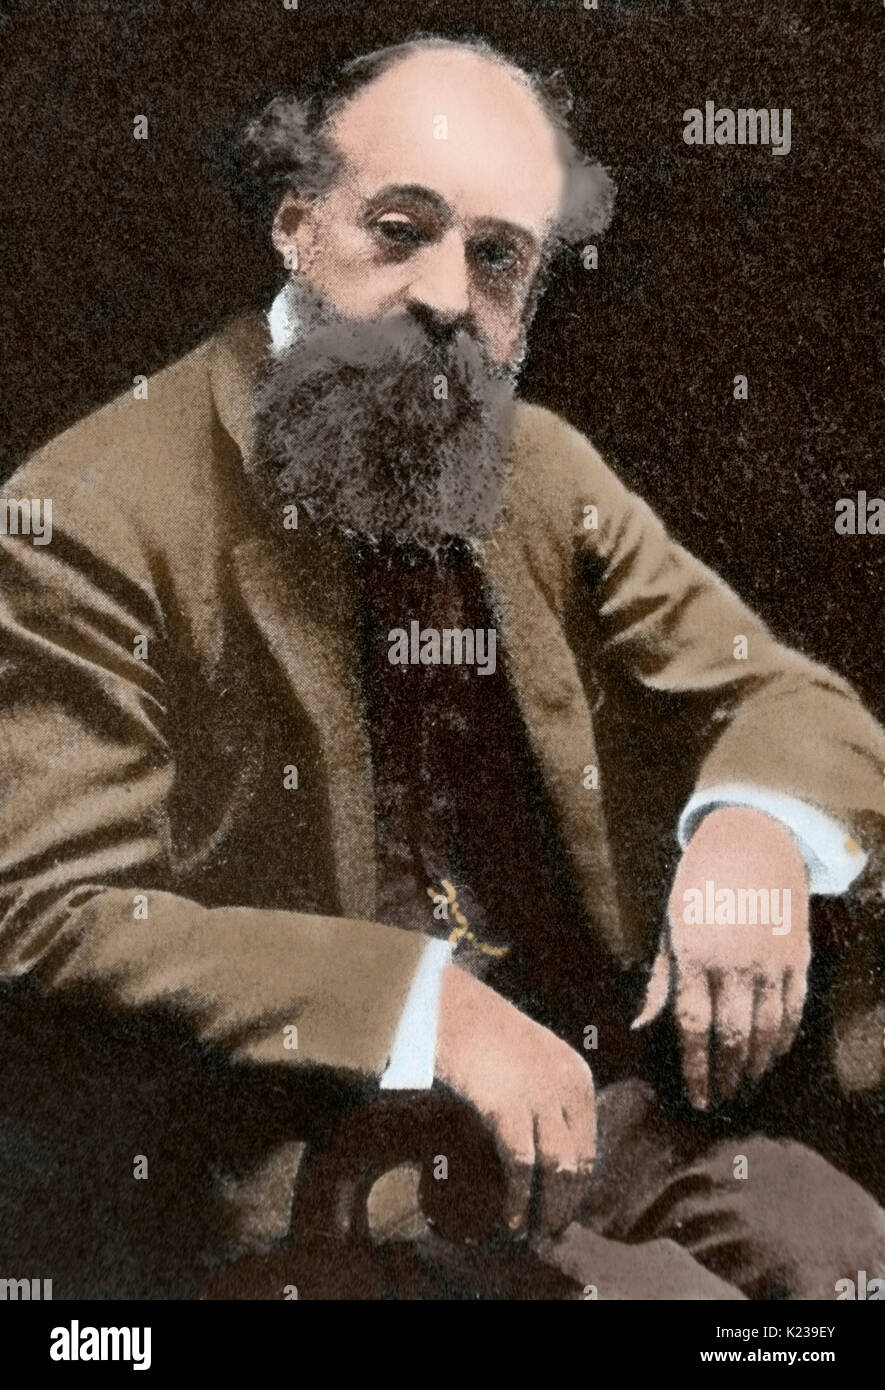 Eusebi Guell i Bacigalupi, 1st Count of Guell (1846-1918). Spanish industrialist and politician. Known for being the patron of the modernist architect Antonio Gaudi. Portrait. Colored. Stock Photo